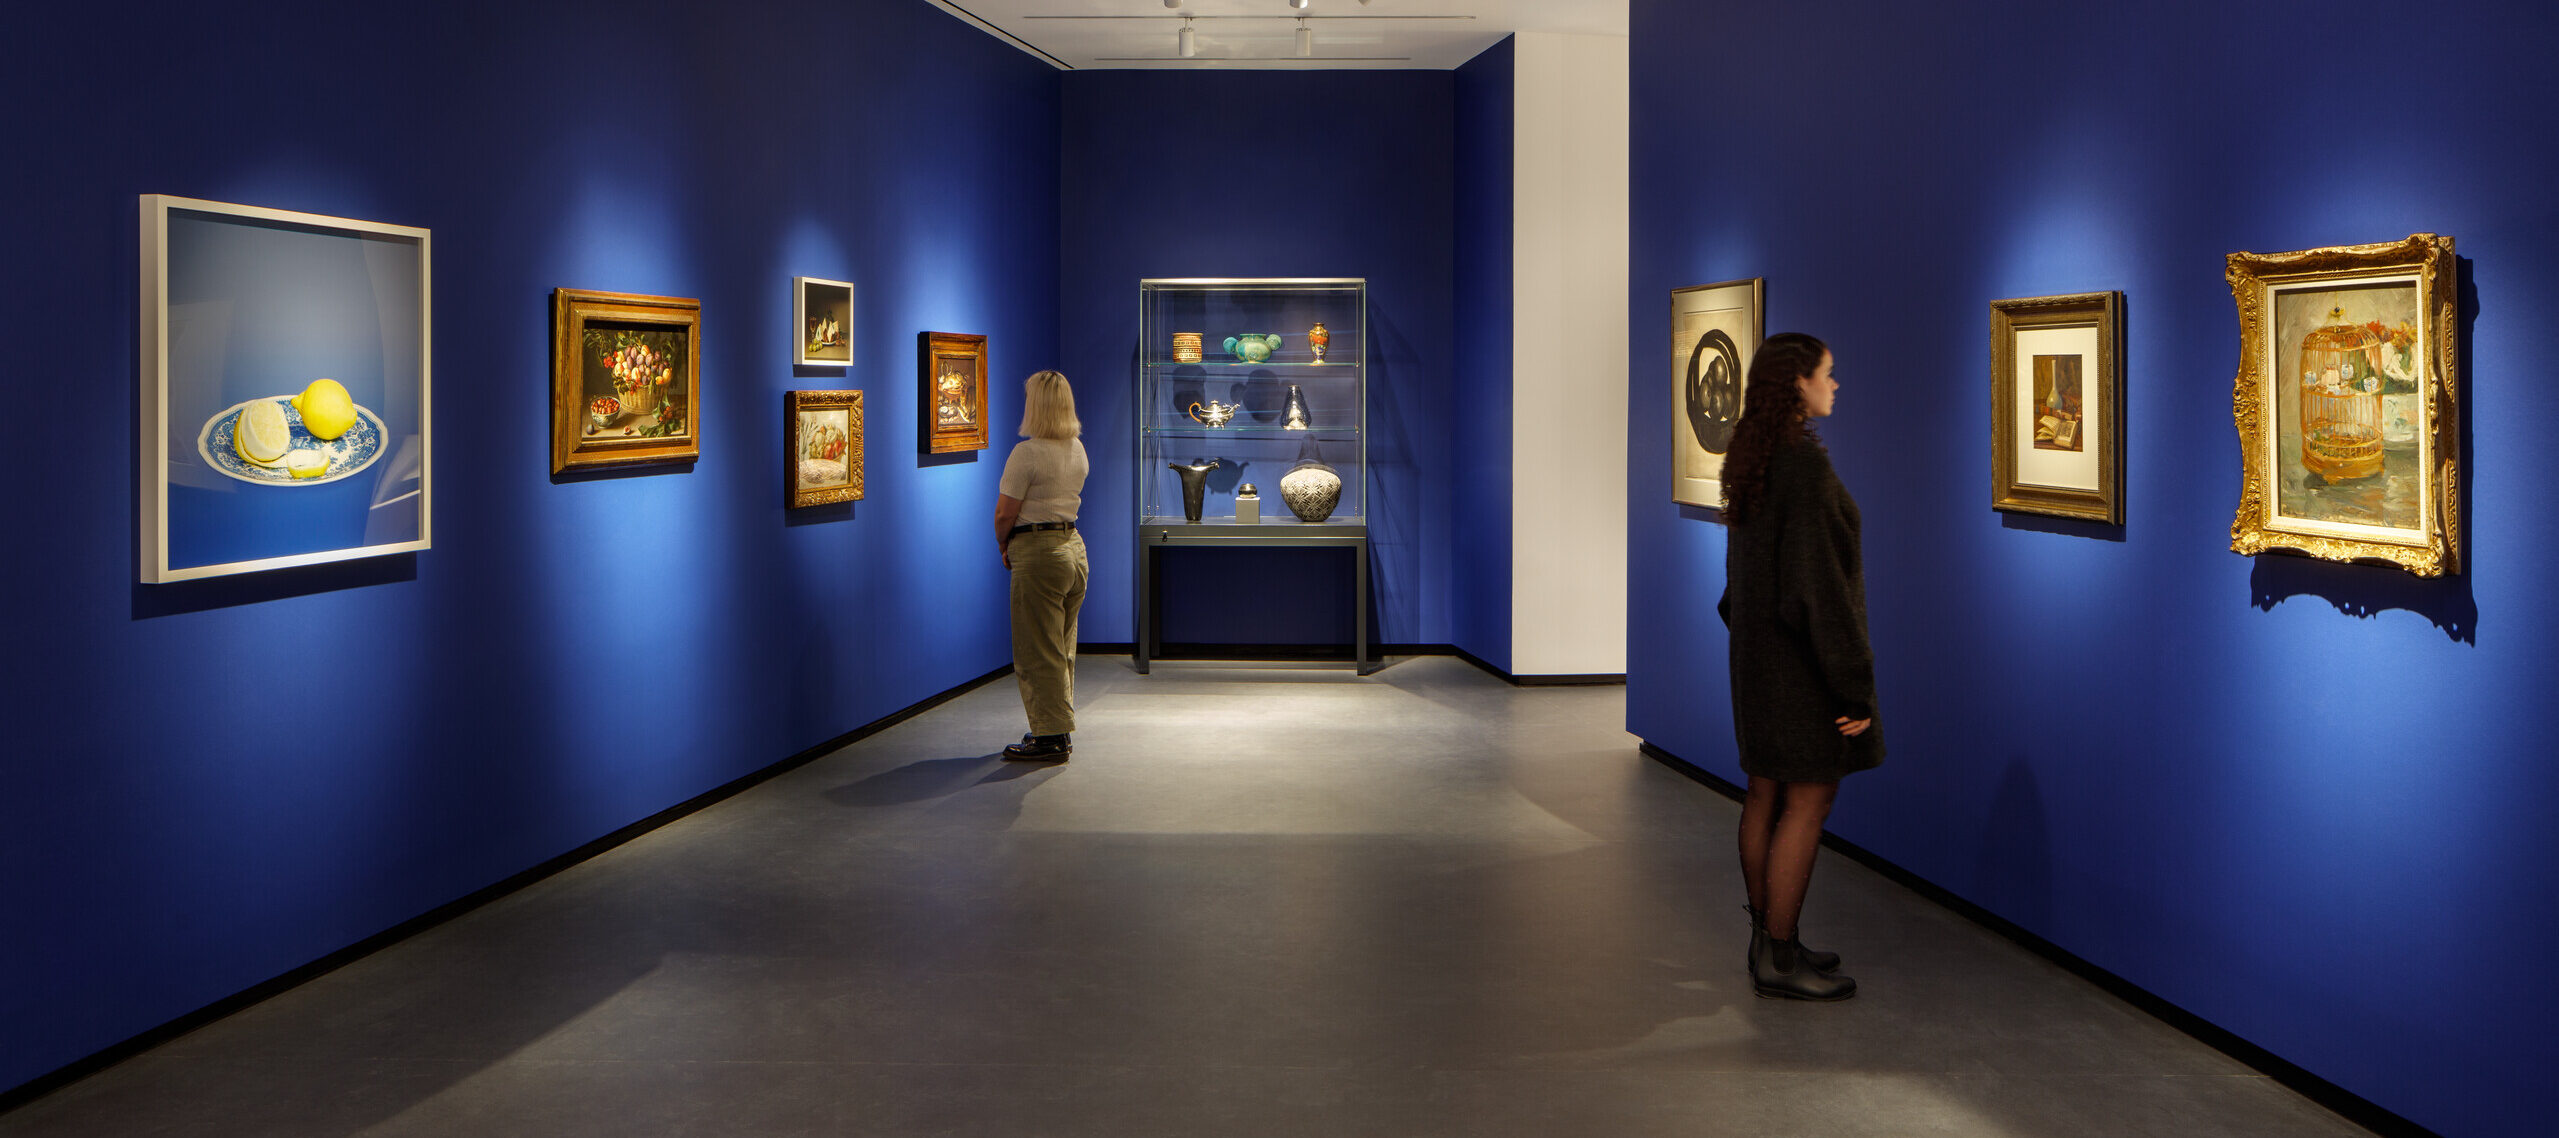 Museum visitors observe artworks hanging on the royal blue walls of a small gallery bay. Paintings of various sizes are on display, and small sculptures are in a glass case.